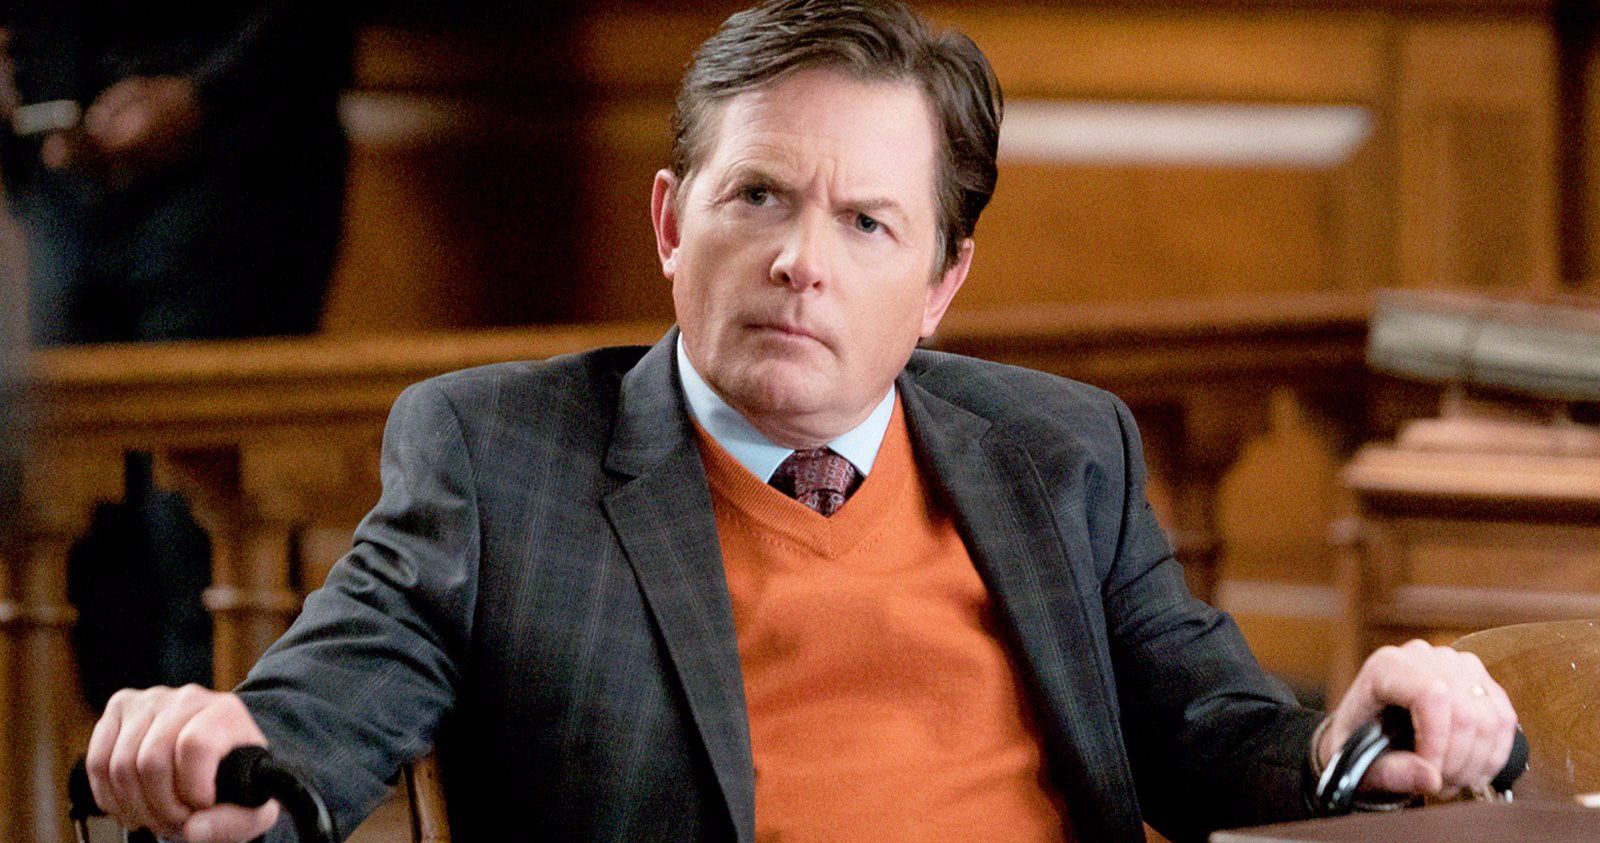 Michael J. Fox Opens Up About His Struggles with Acting and New Passion for Writing